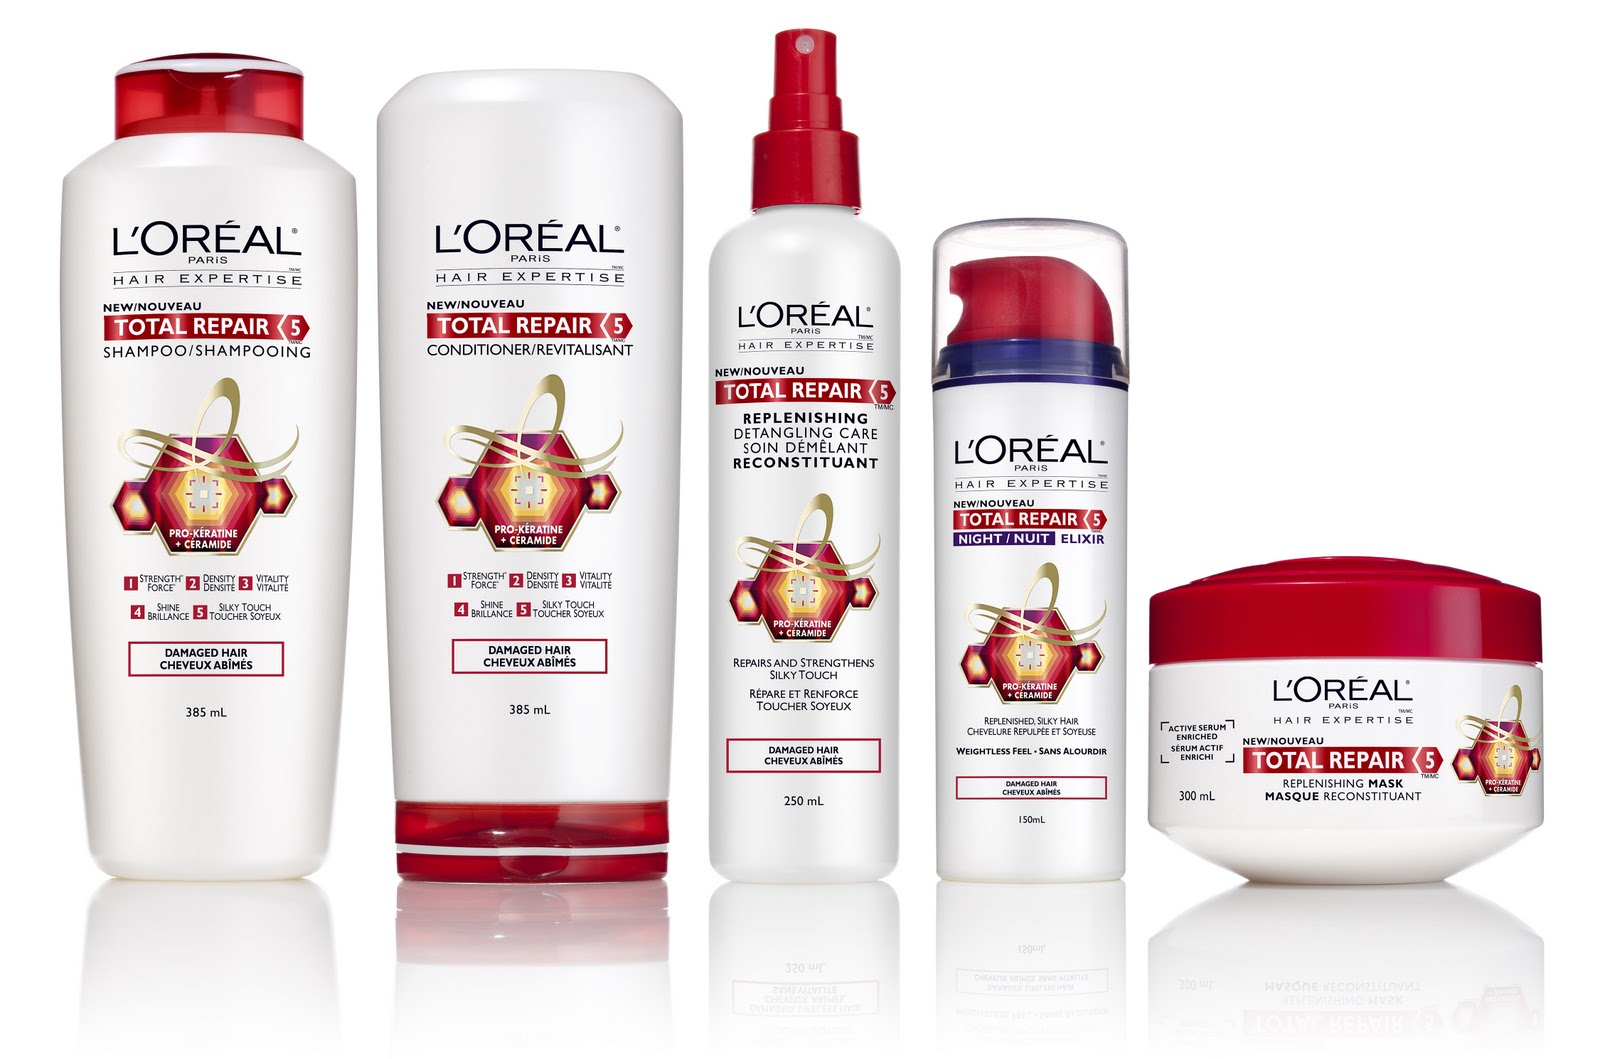 1. L'Oreal Paris Hair Care Advanced Hairstyle Boost It Volume Inject Mousse - wide 5